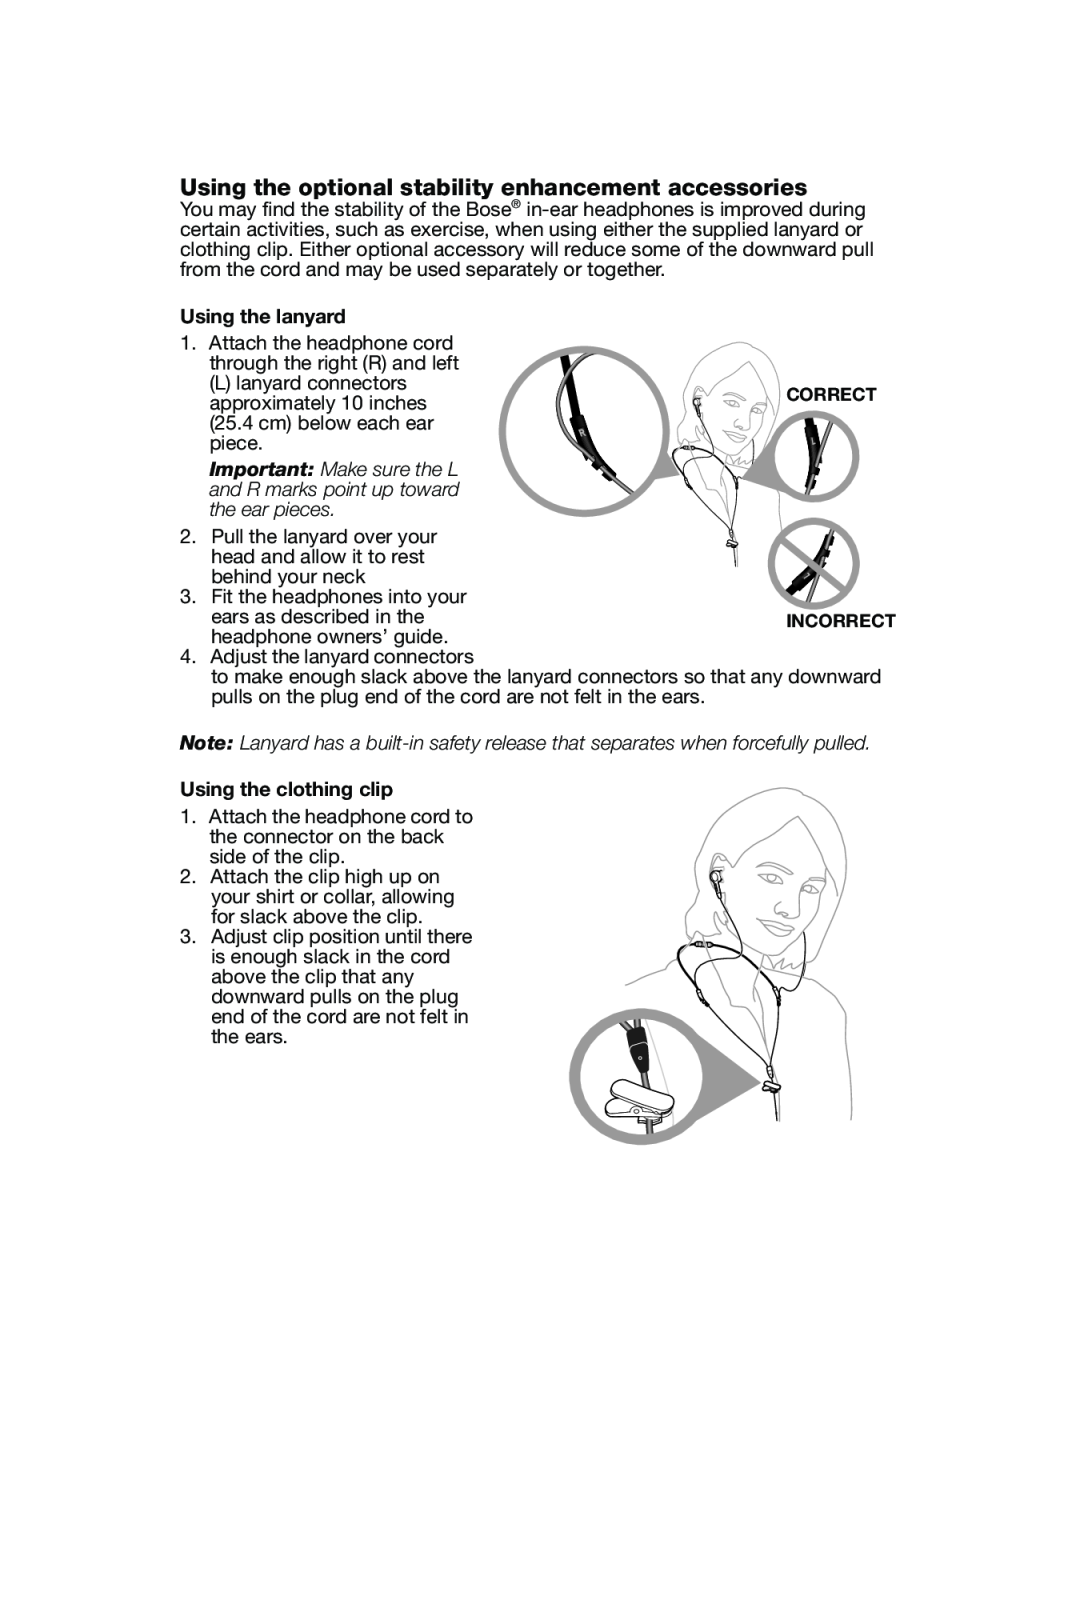 Bose In-Ear Headphones manual Using the lanyard, Using the clothing clip 